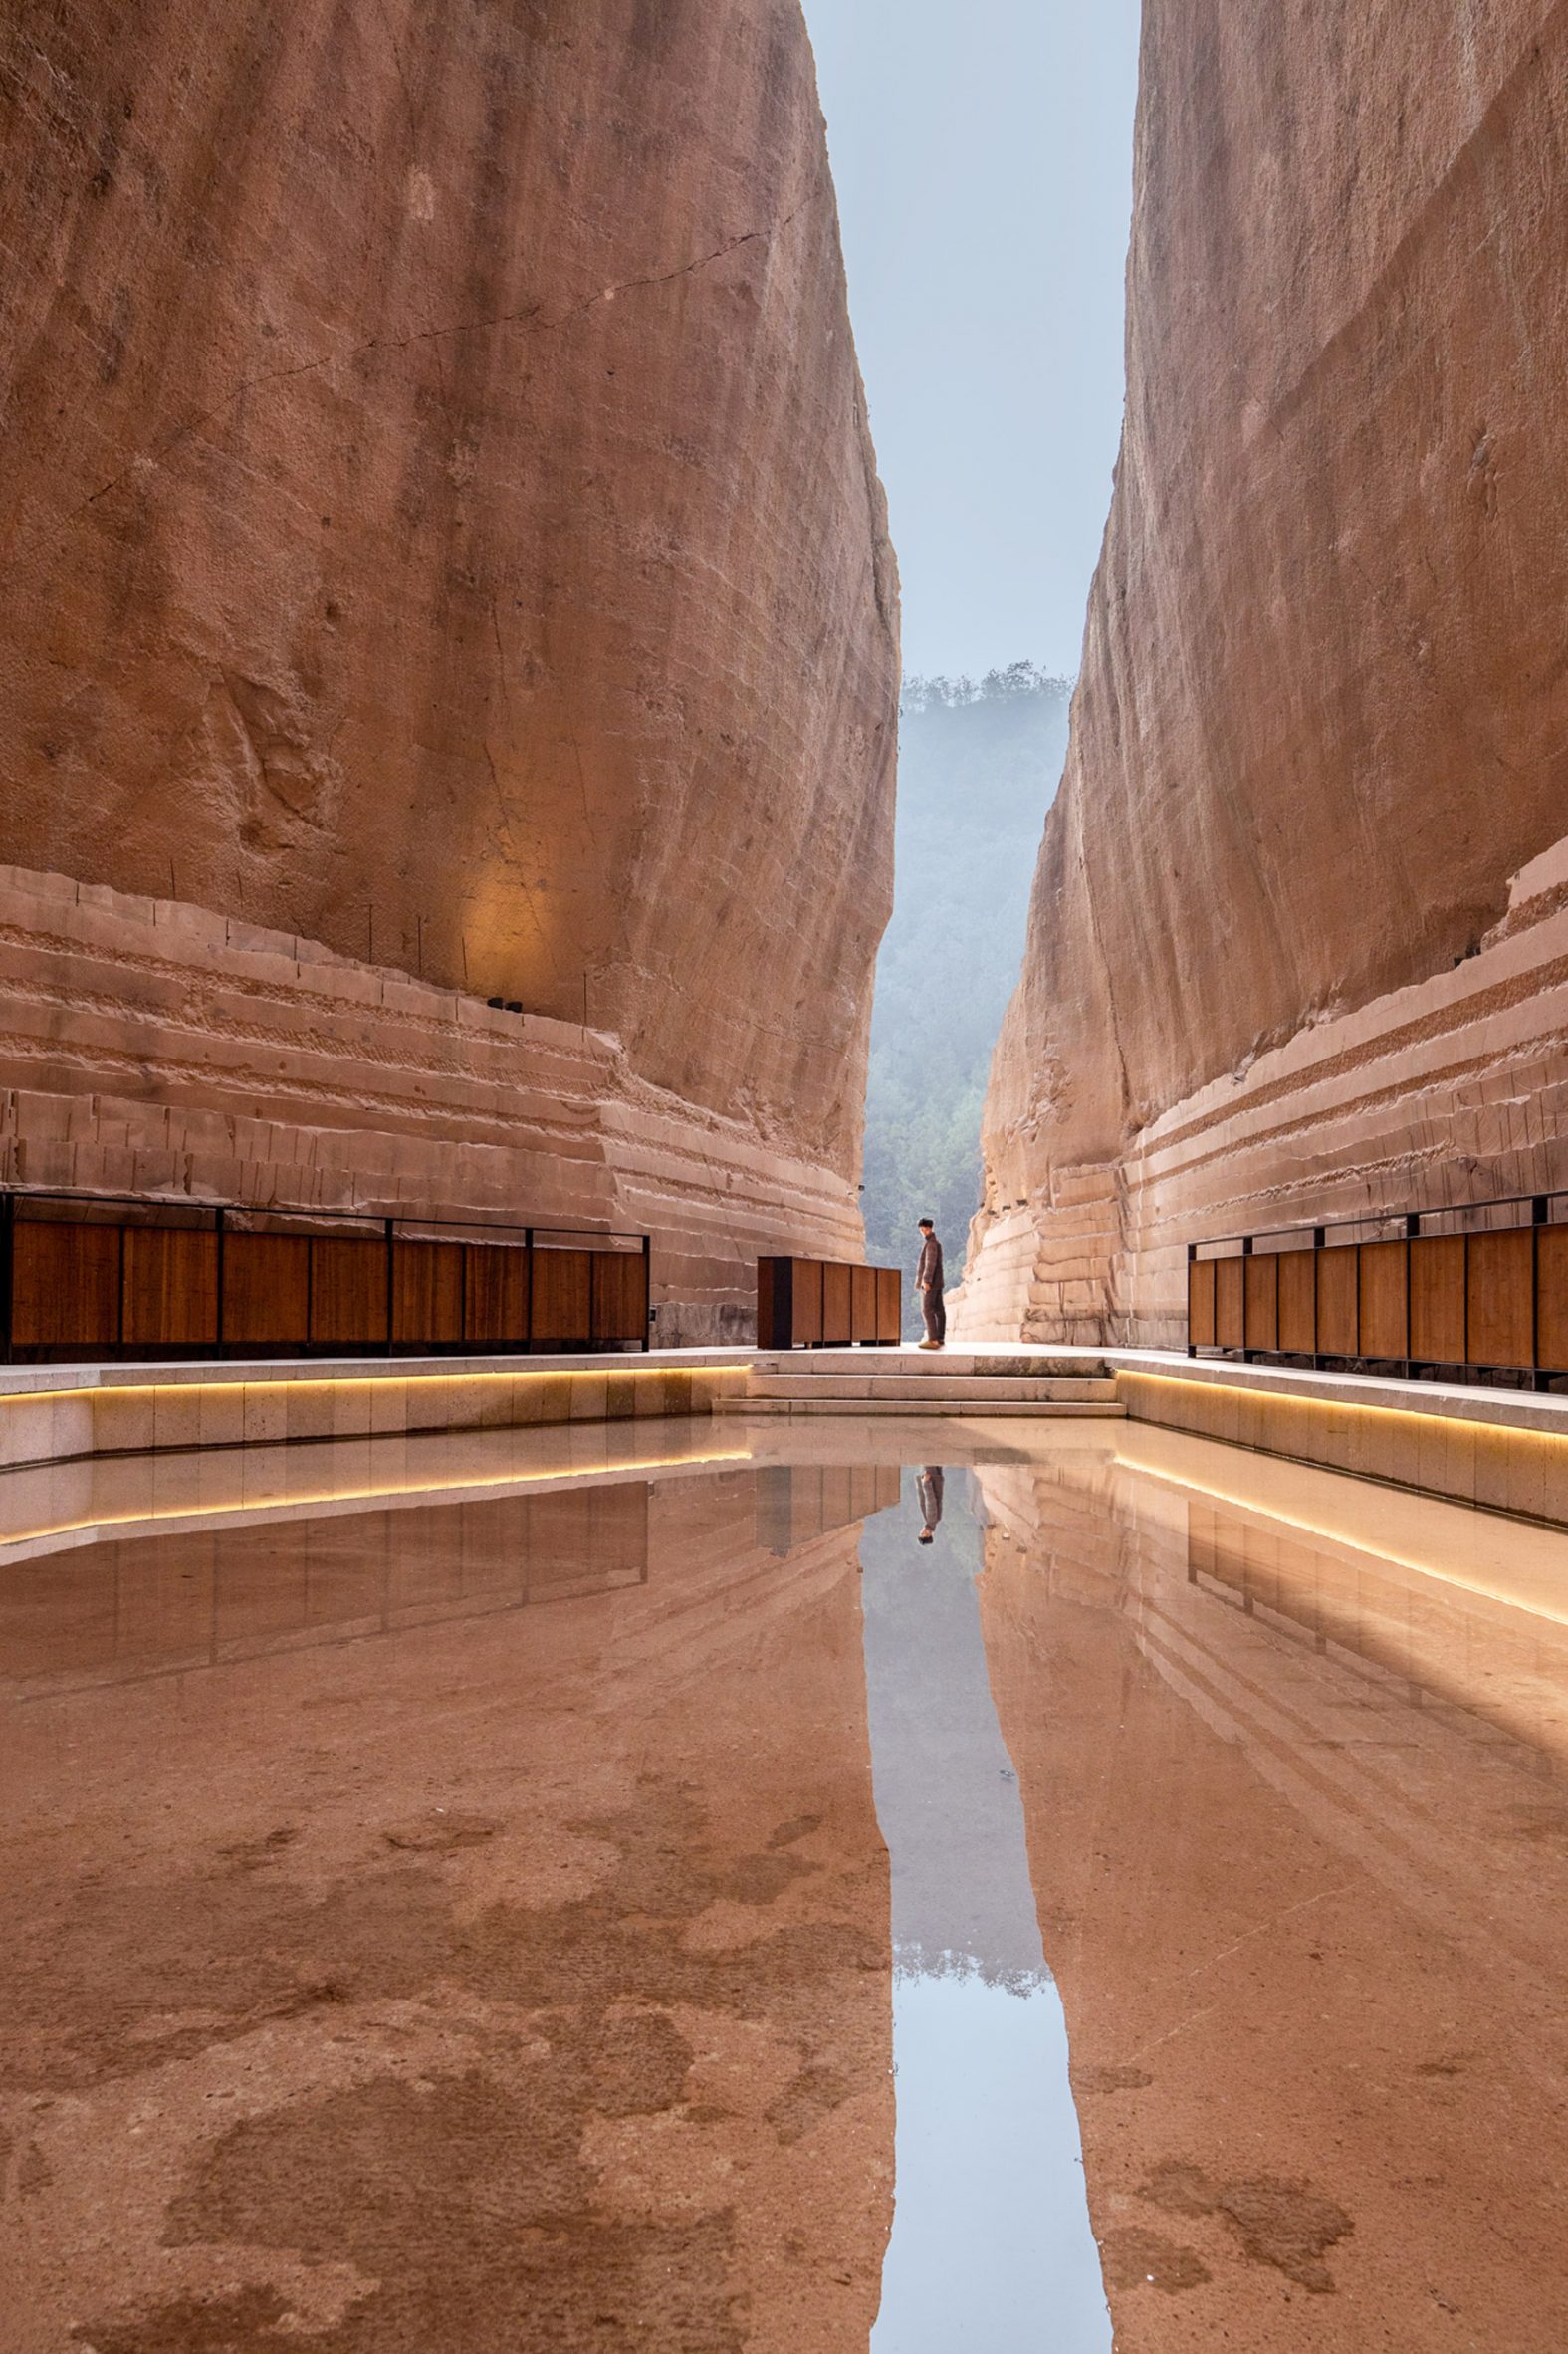 Quarry performance space by DnA_Design and Architecture in China